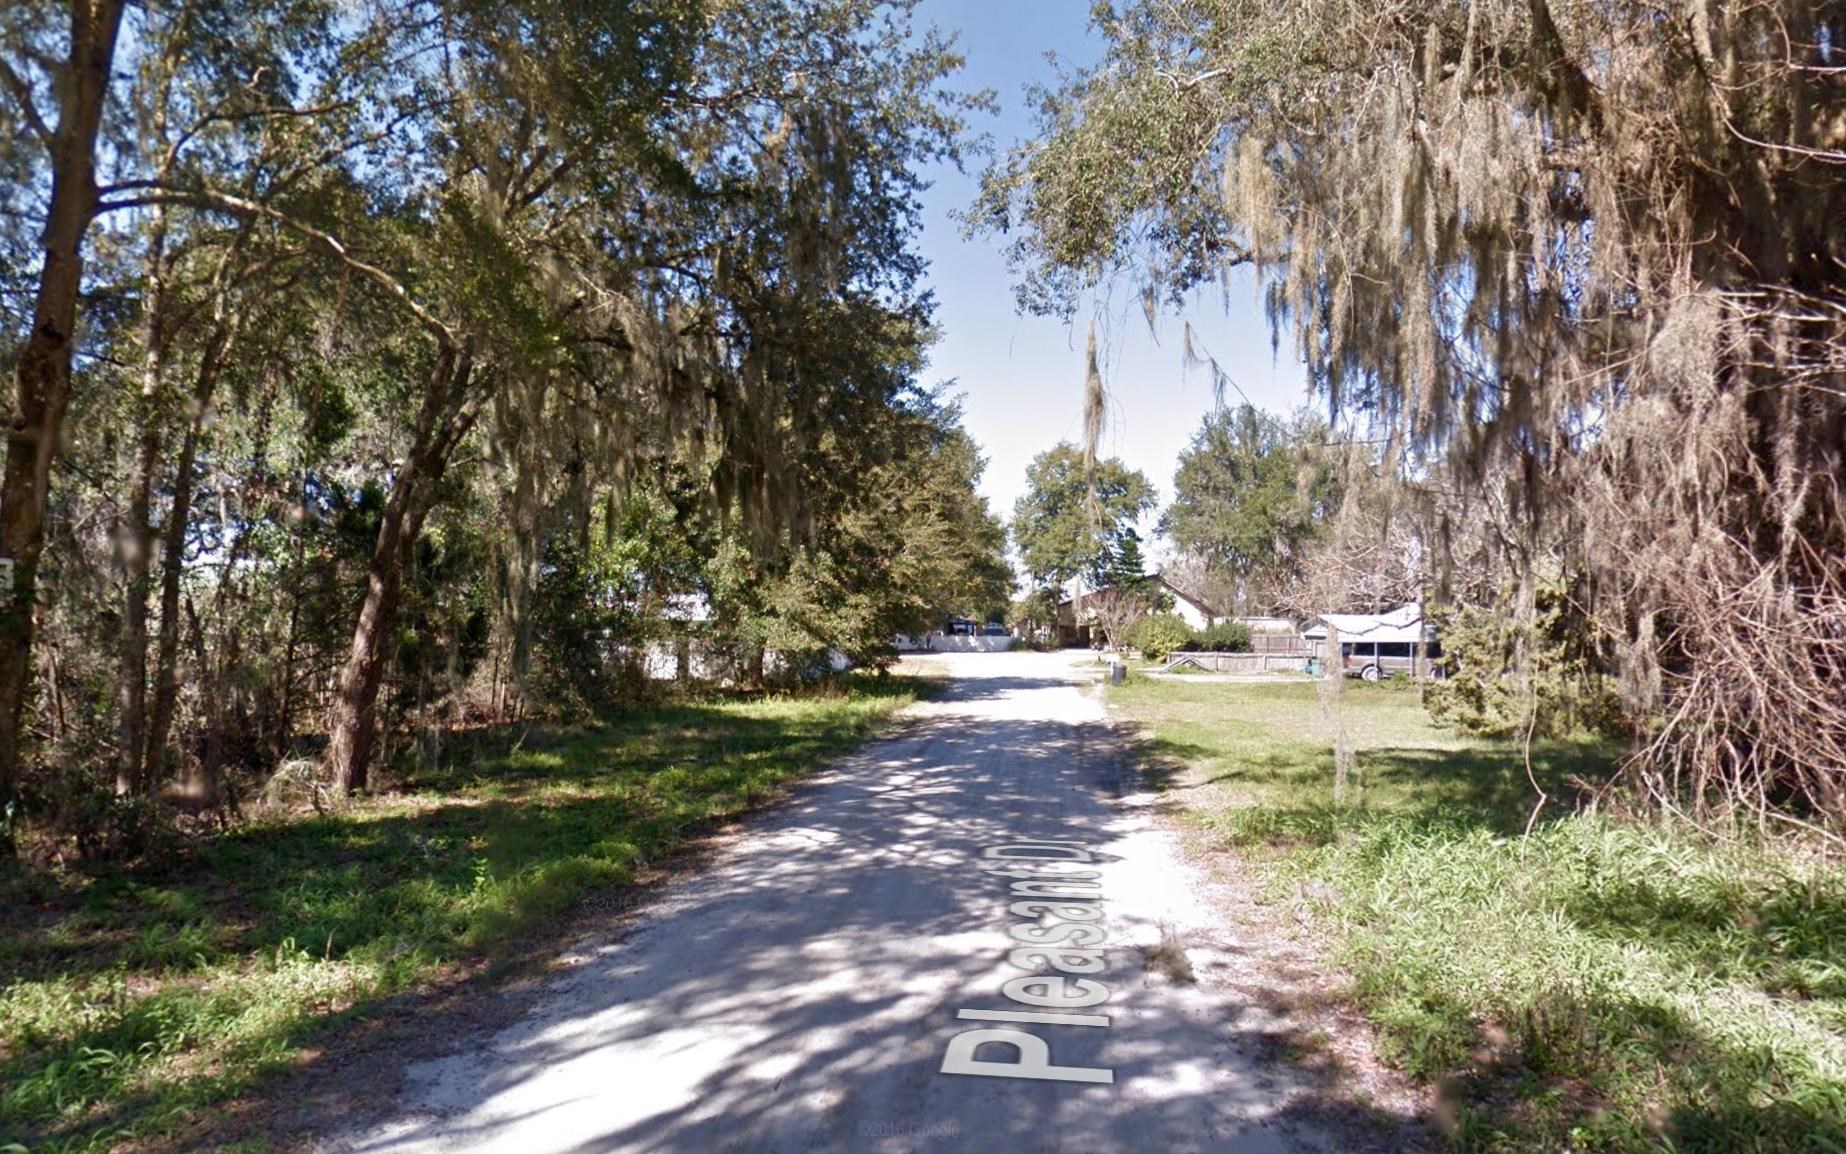 Build your dream house on this beautiful lot in a Quiet, Distinguished and well established neighborhood.This Vacant lot is located 3 lots from the St. John's River on a Paved road in beautiful East Palatka. No HOA.and a few blocks from Public Boat Launch ramp for  Bass Fishing Anglers!Close 95 &  St. Augustine's Crescent Beach .Short Drive to Downtown Historic Palatka .Seller has a current survey and property is clearly staked to show boundary lines. X-flood zone and No Mobile Homes permitted.